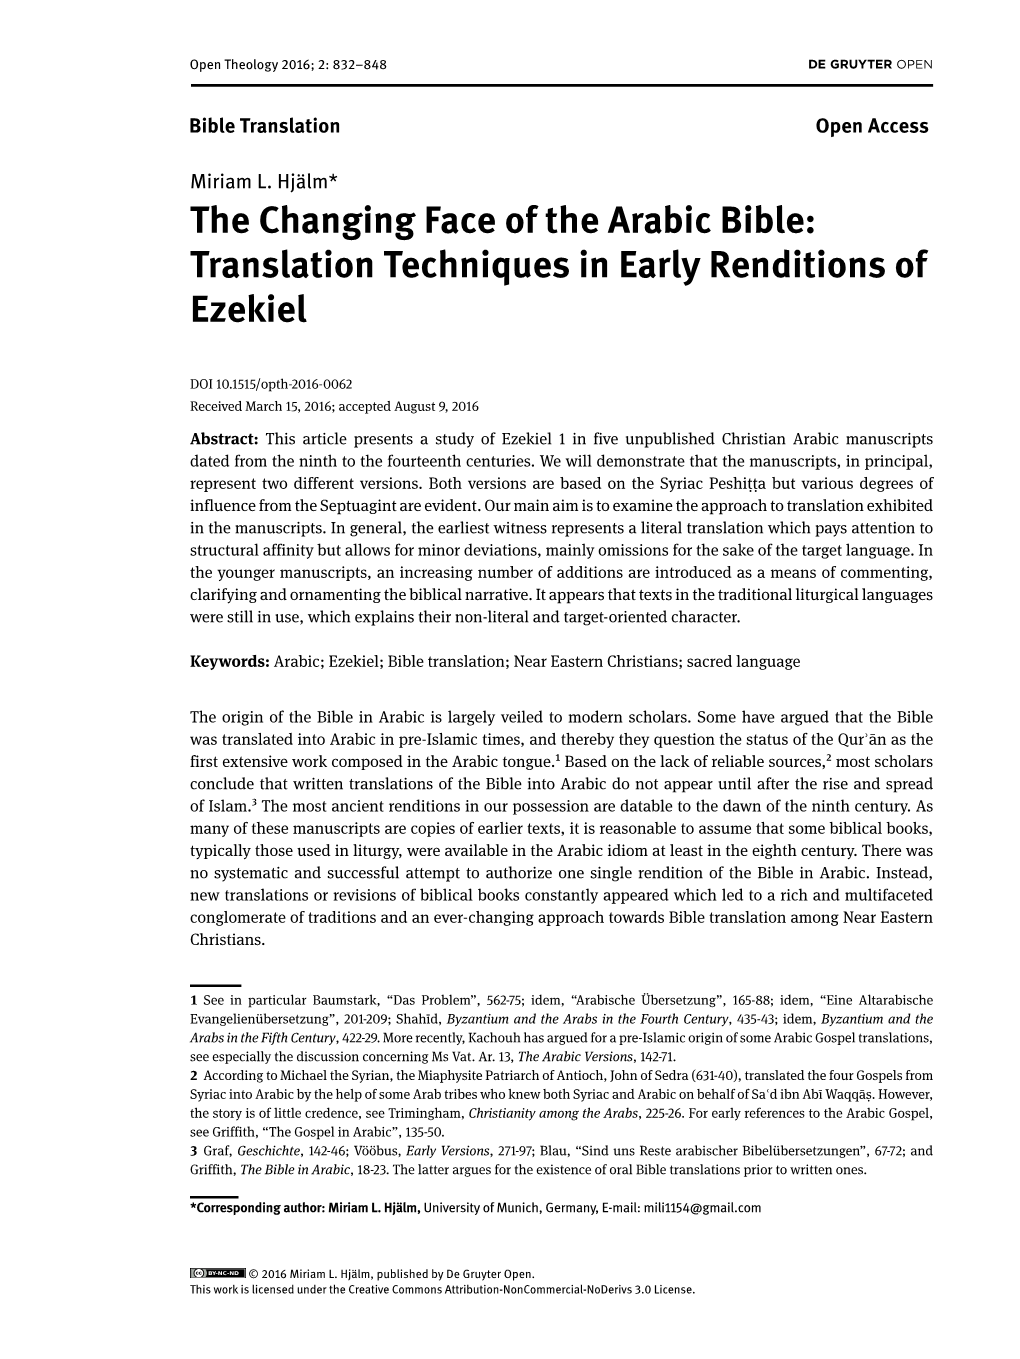 The Changing Face of the Arabic Bible: Translation Techniques in Early Renditions of Ezekiel